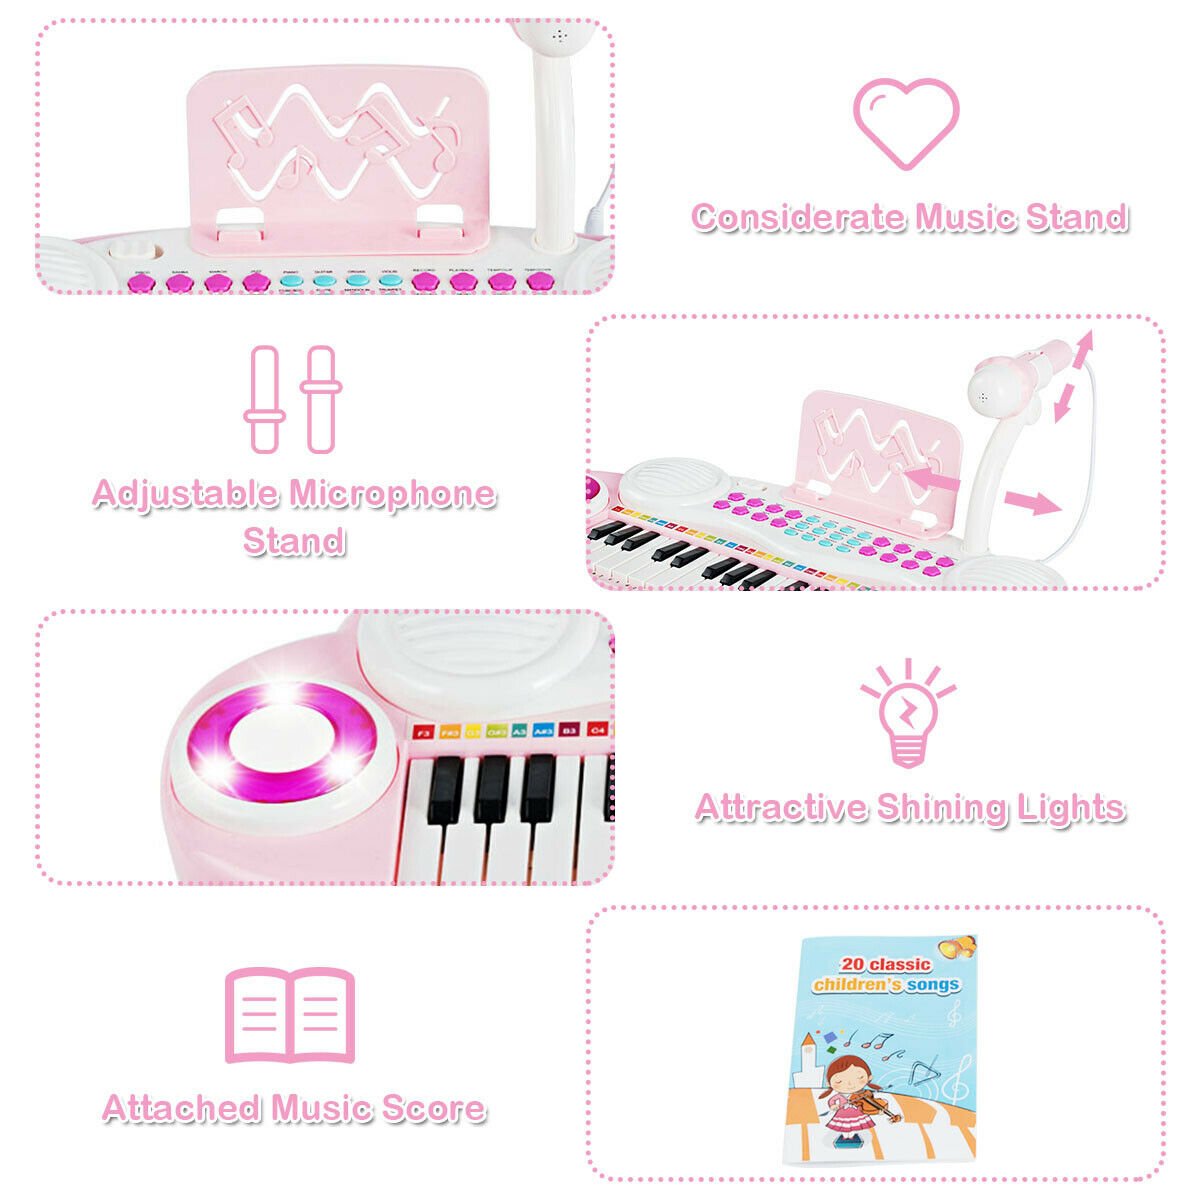 Multifunctional 37 Electric Keyboard Piano with Microphone, Pink